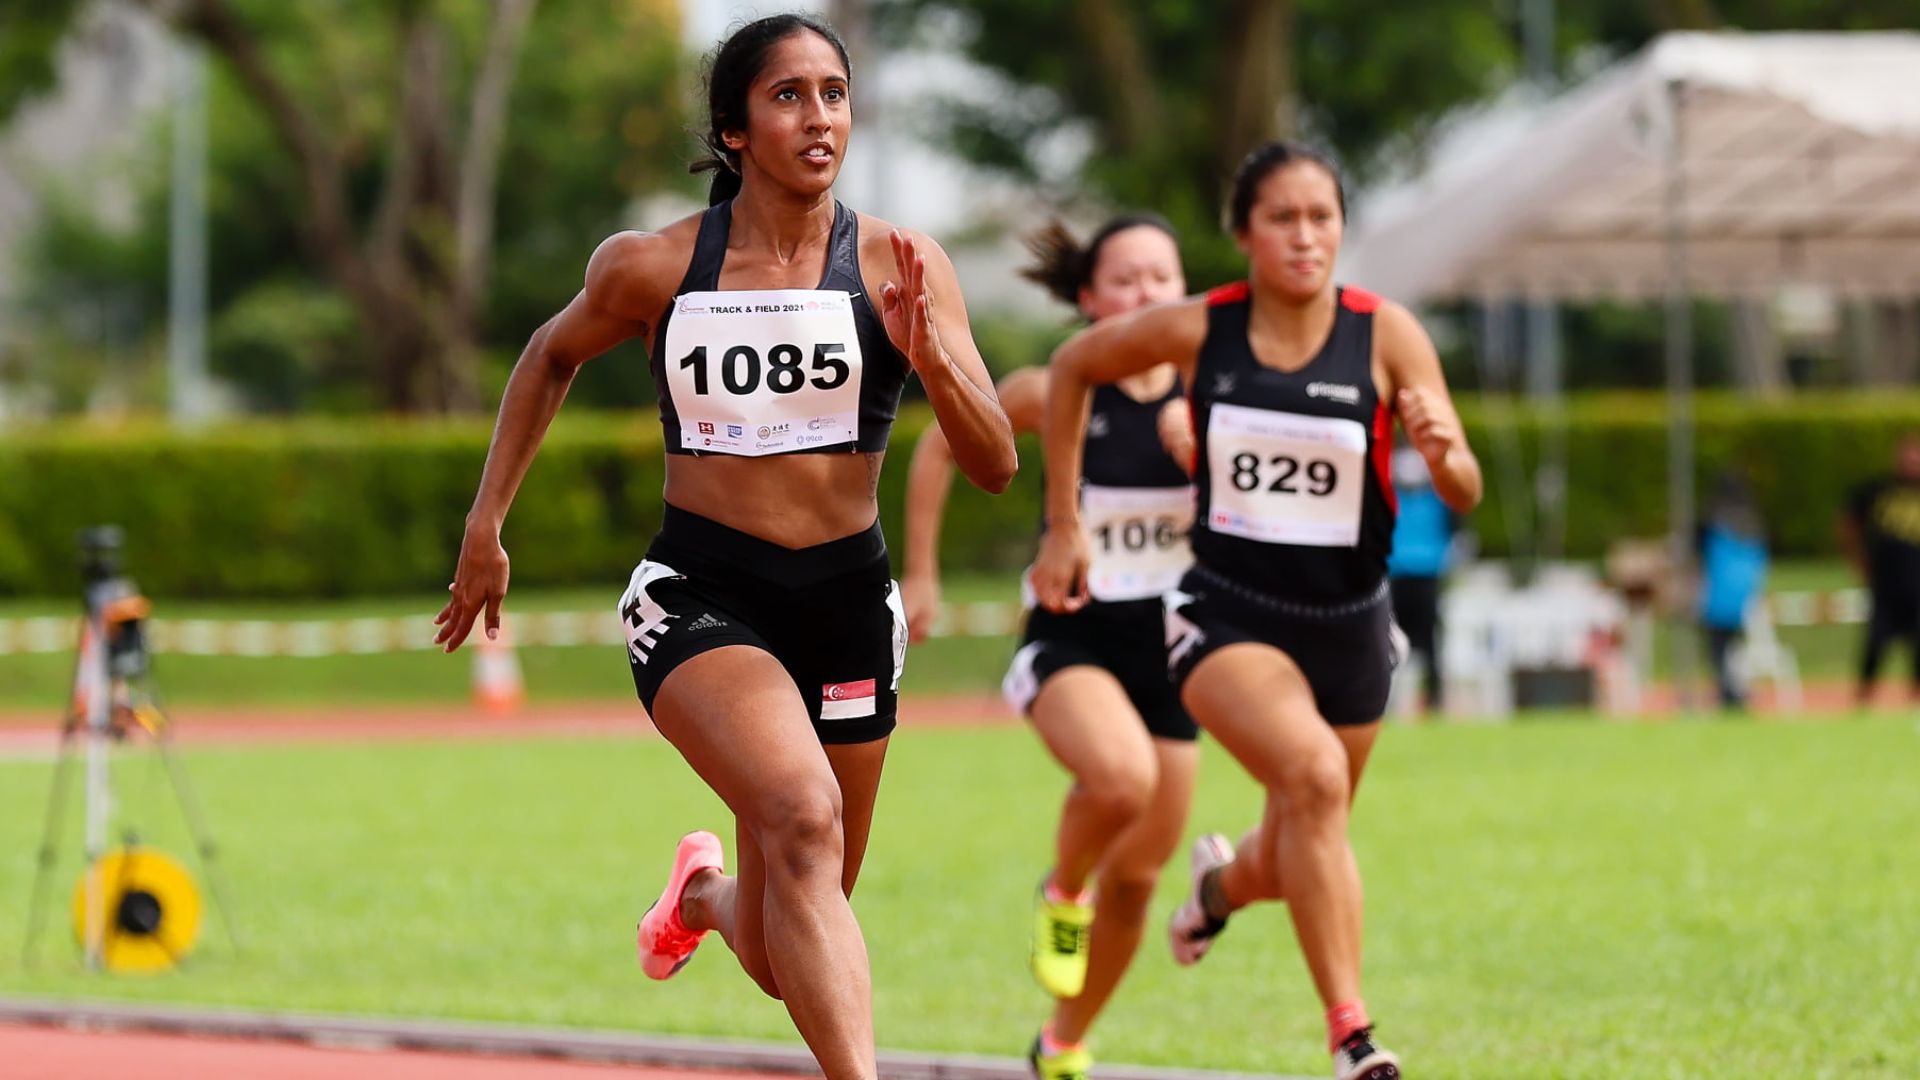 Passion for gold: Shanti Pereira and her need for speed